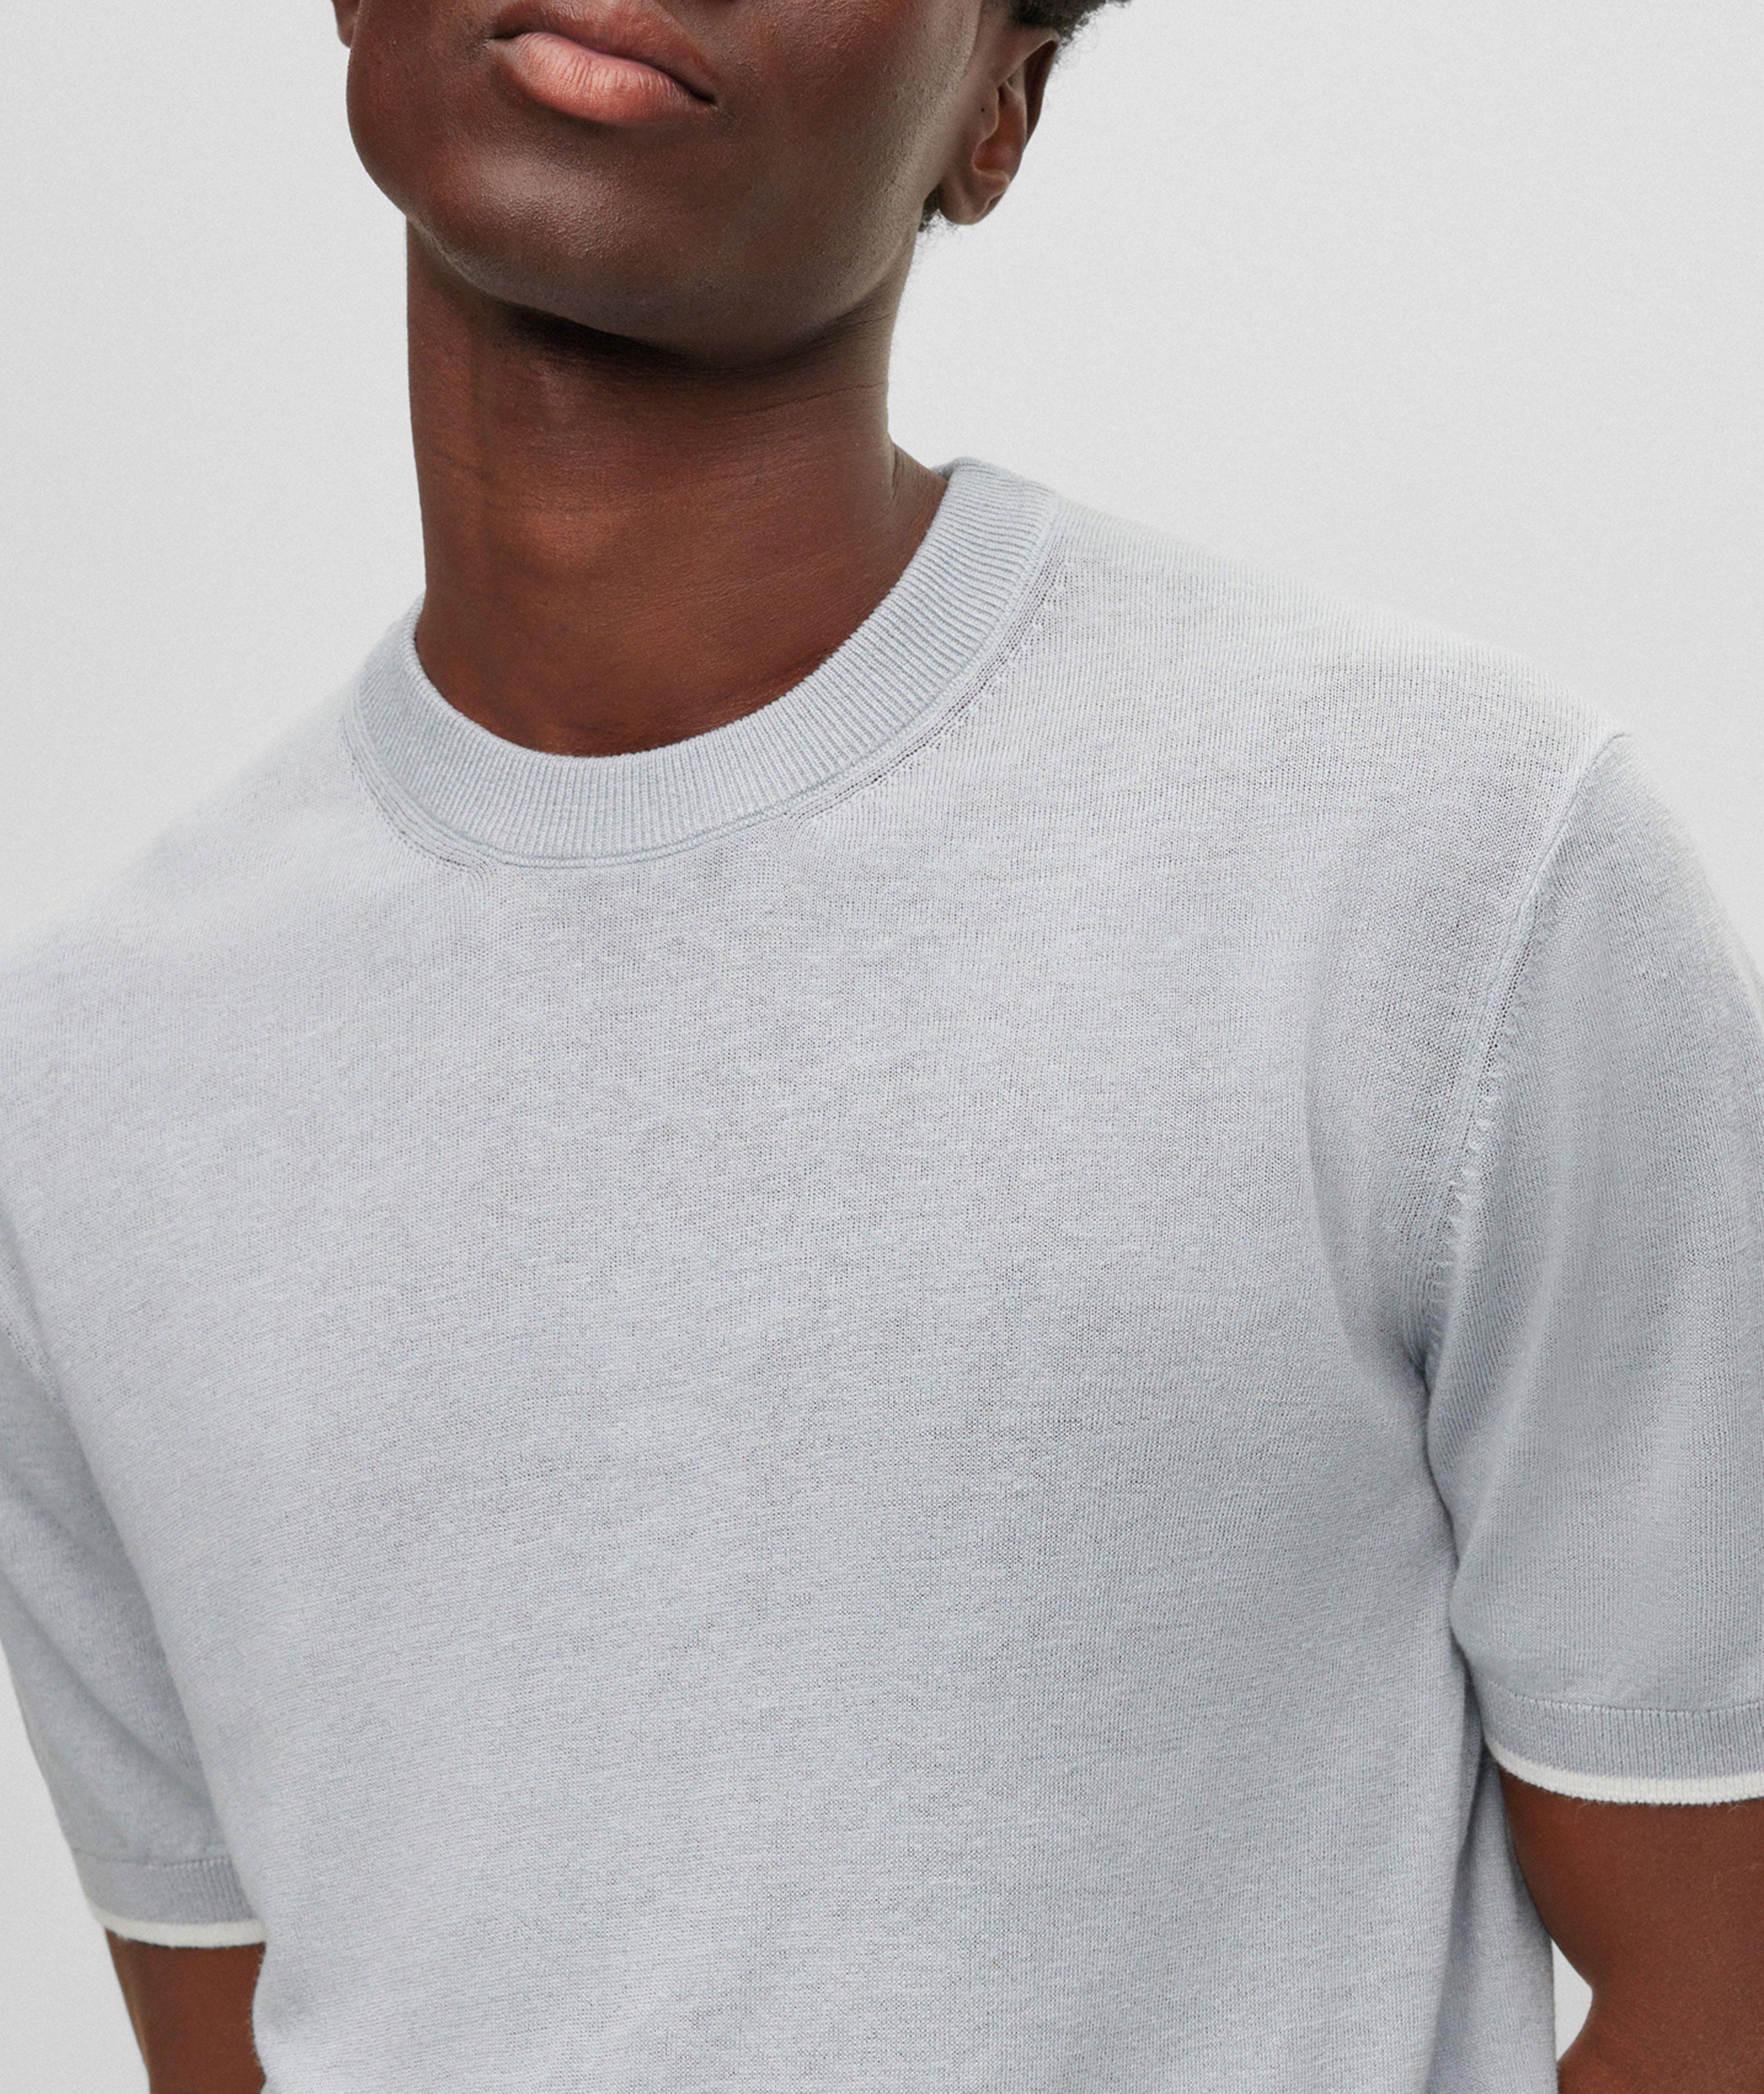 Short-Sleeve Contrast-Tipped Linen-Stretch Sweater  image 4